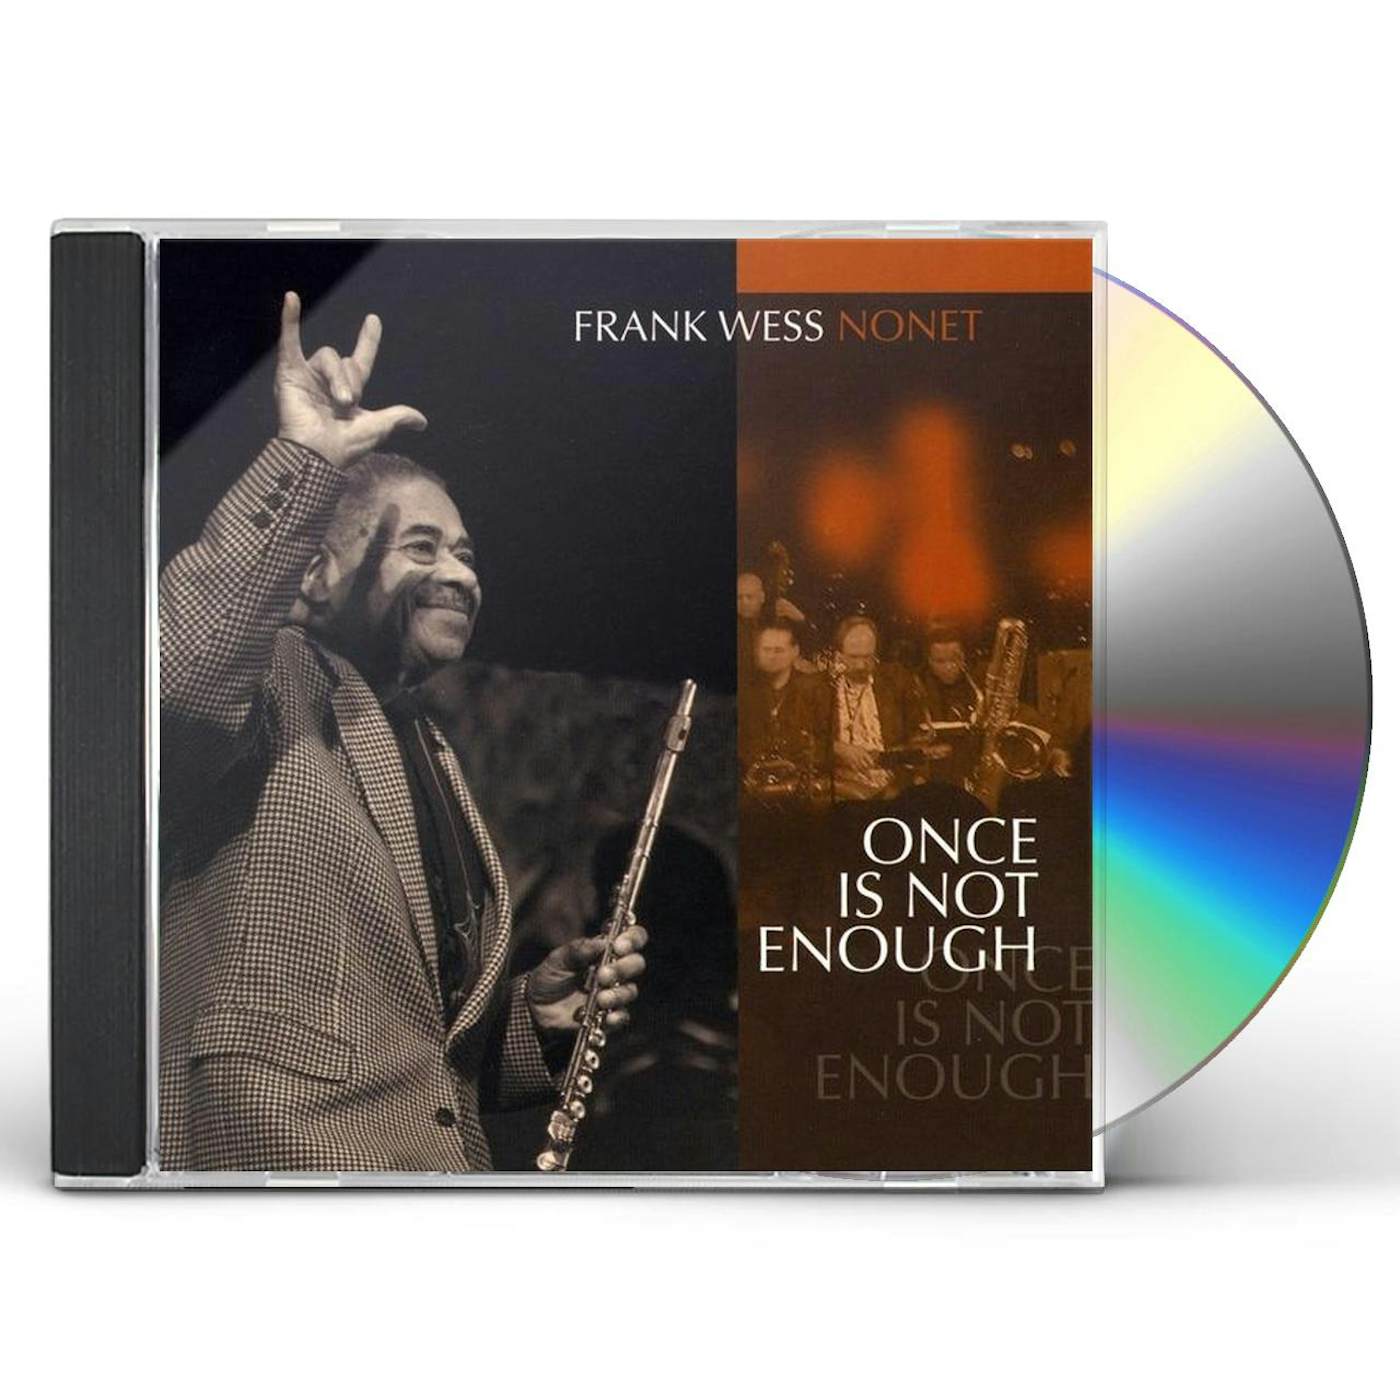 Frank Wess ONCE IS NOT ENOUGH CD